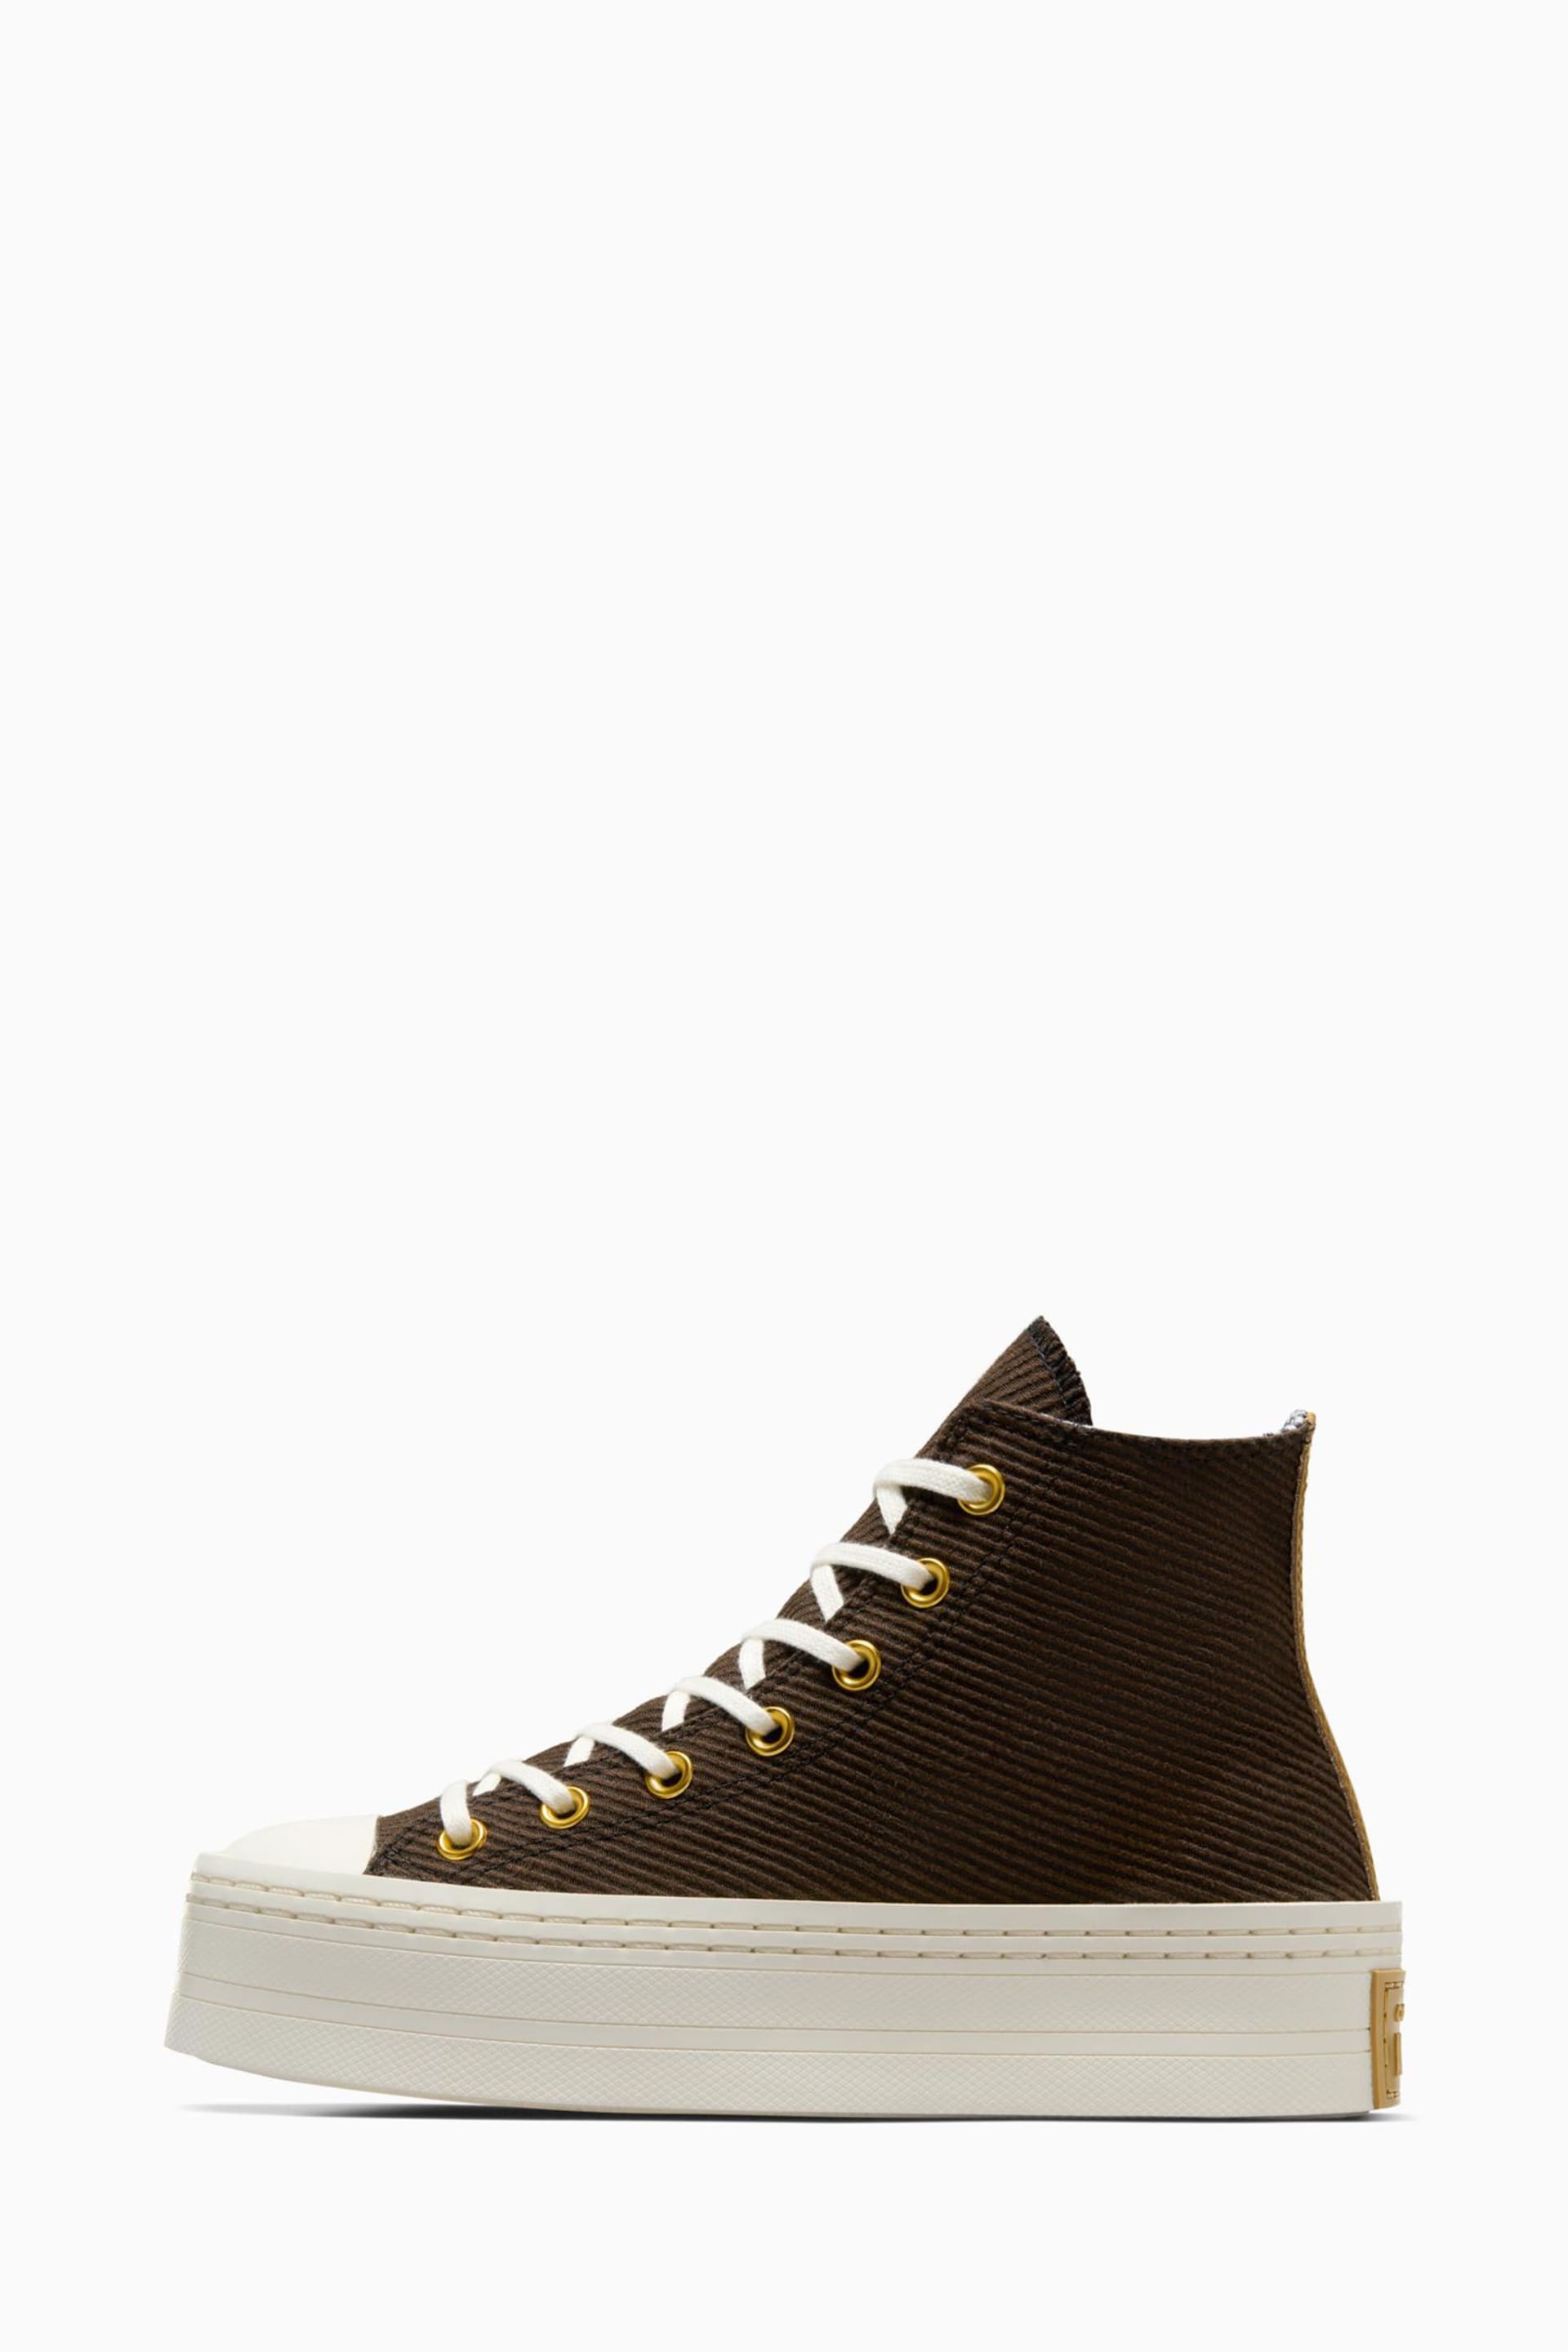 Converse Brown Modern Lift Trainers - Image 2 of 16